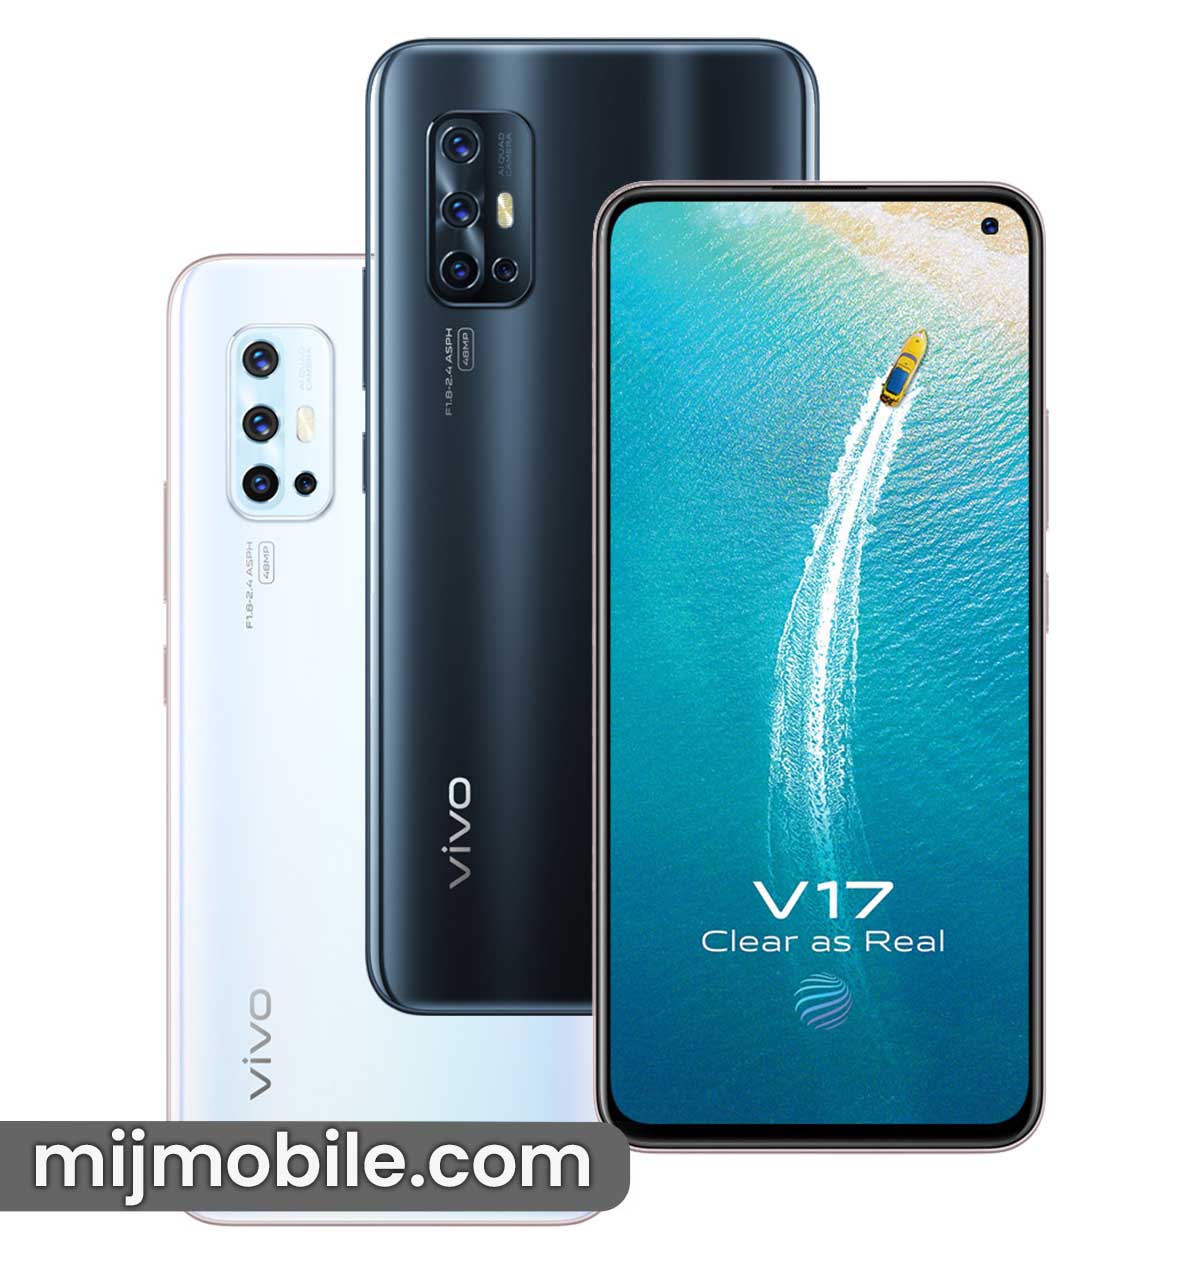 Vivo V17 price in Pakistan and Specifications